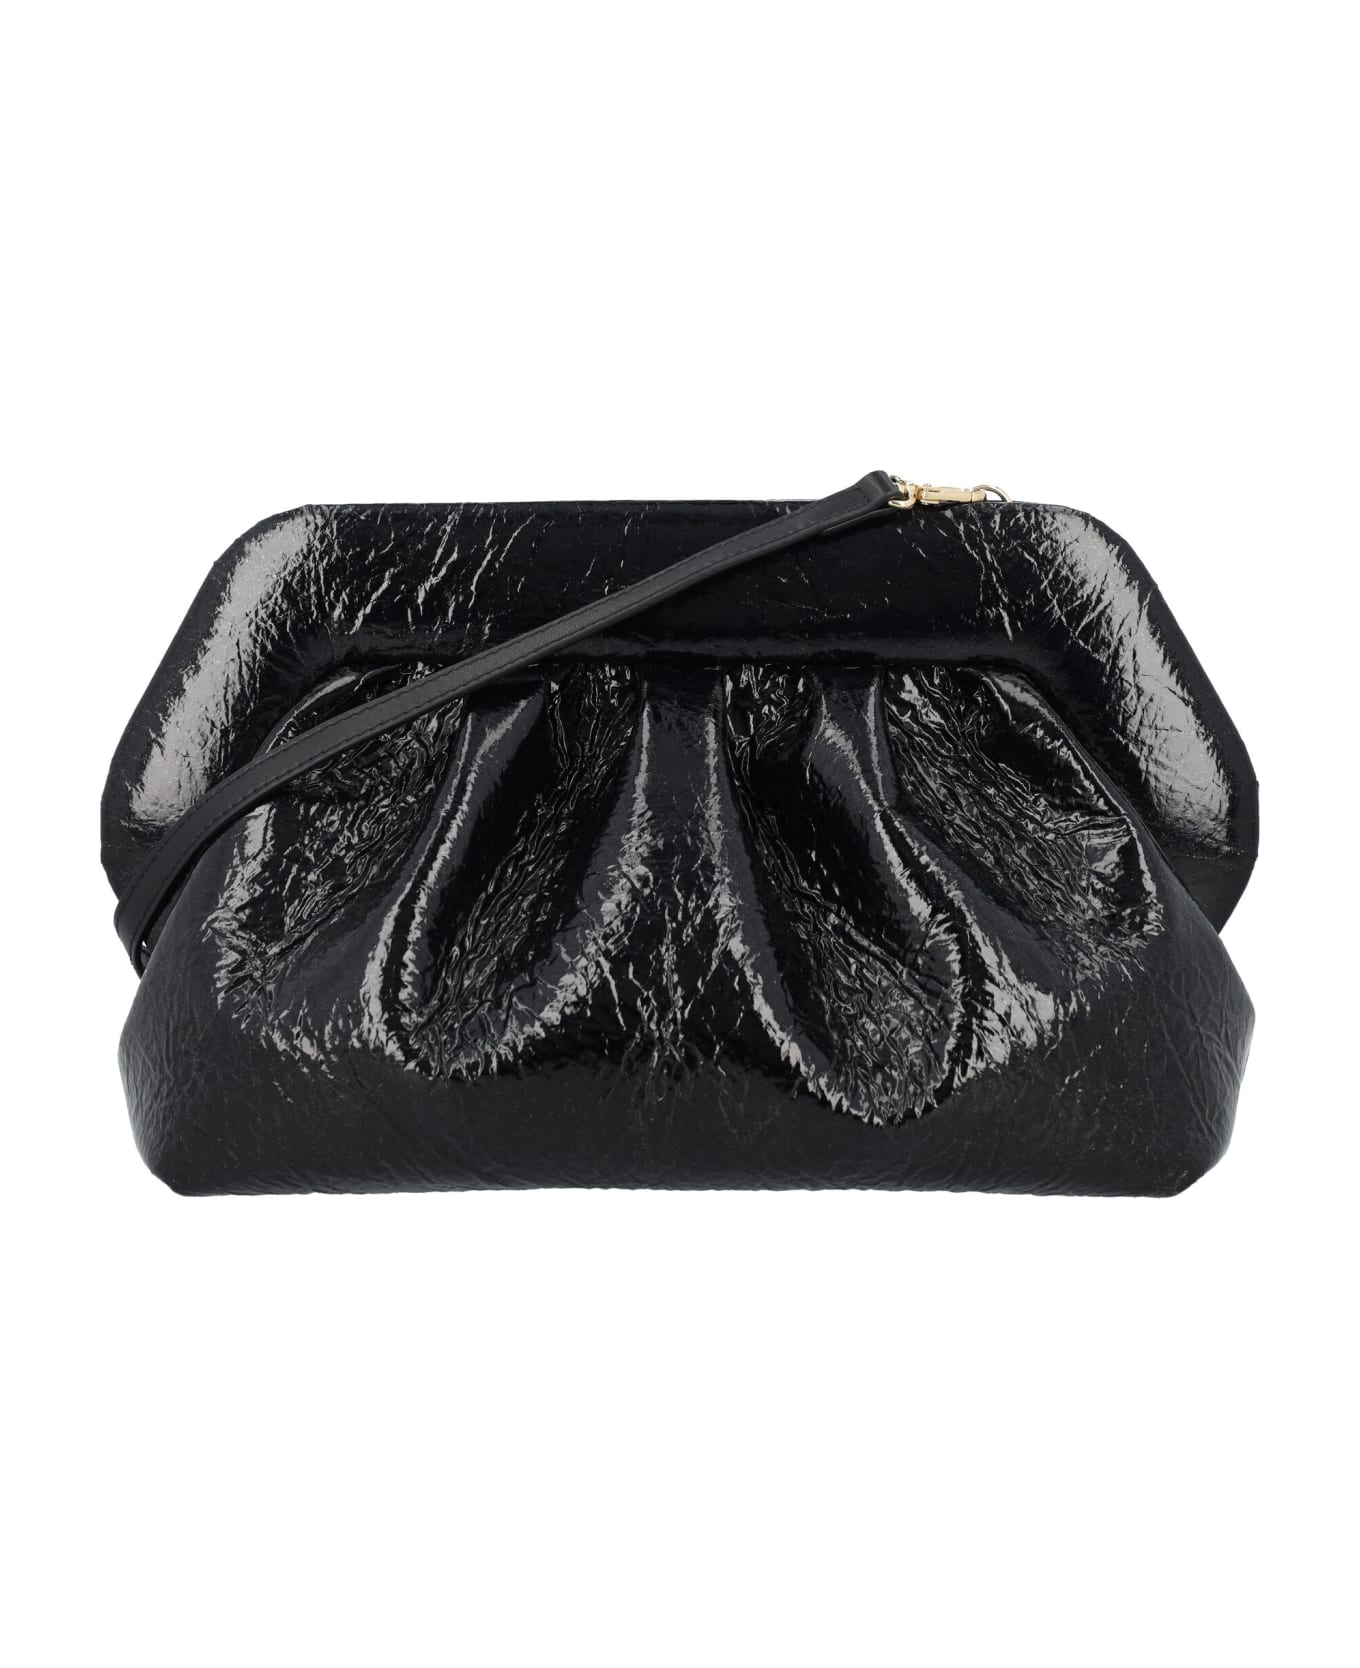 THEMOIRè Bios Clutch Pineapple Leather - BLACK クラッチバッグ